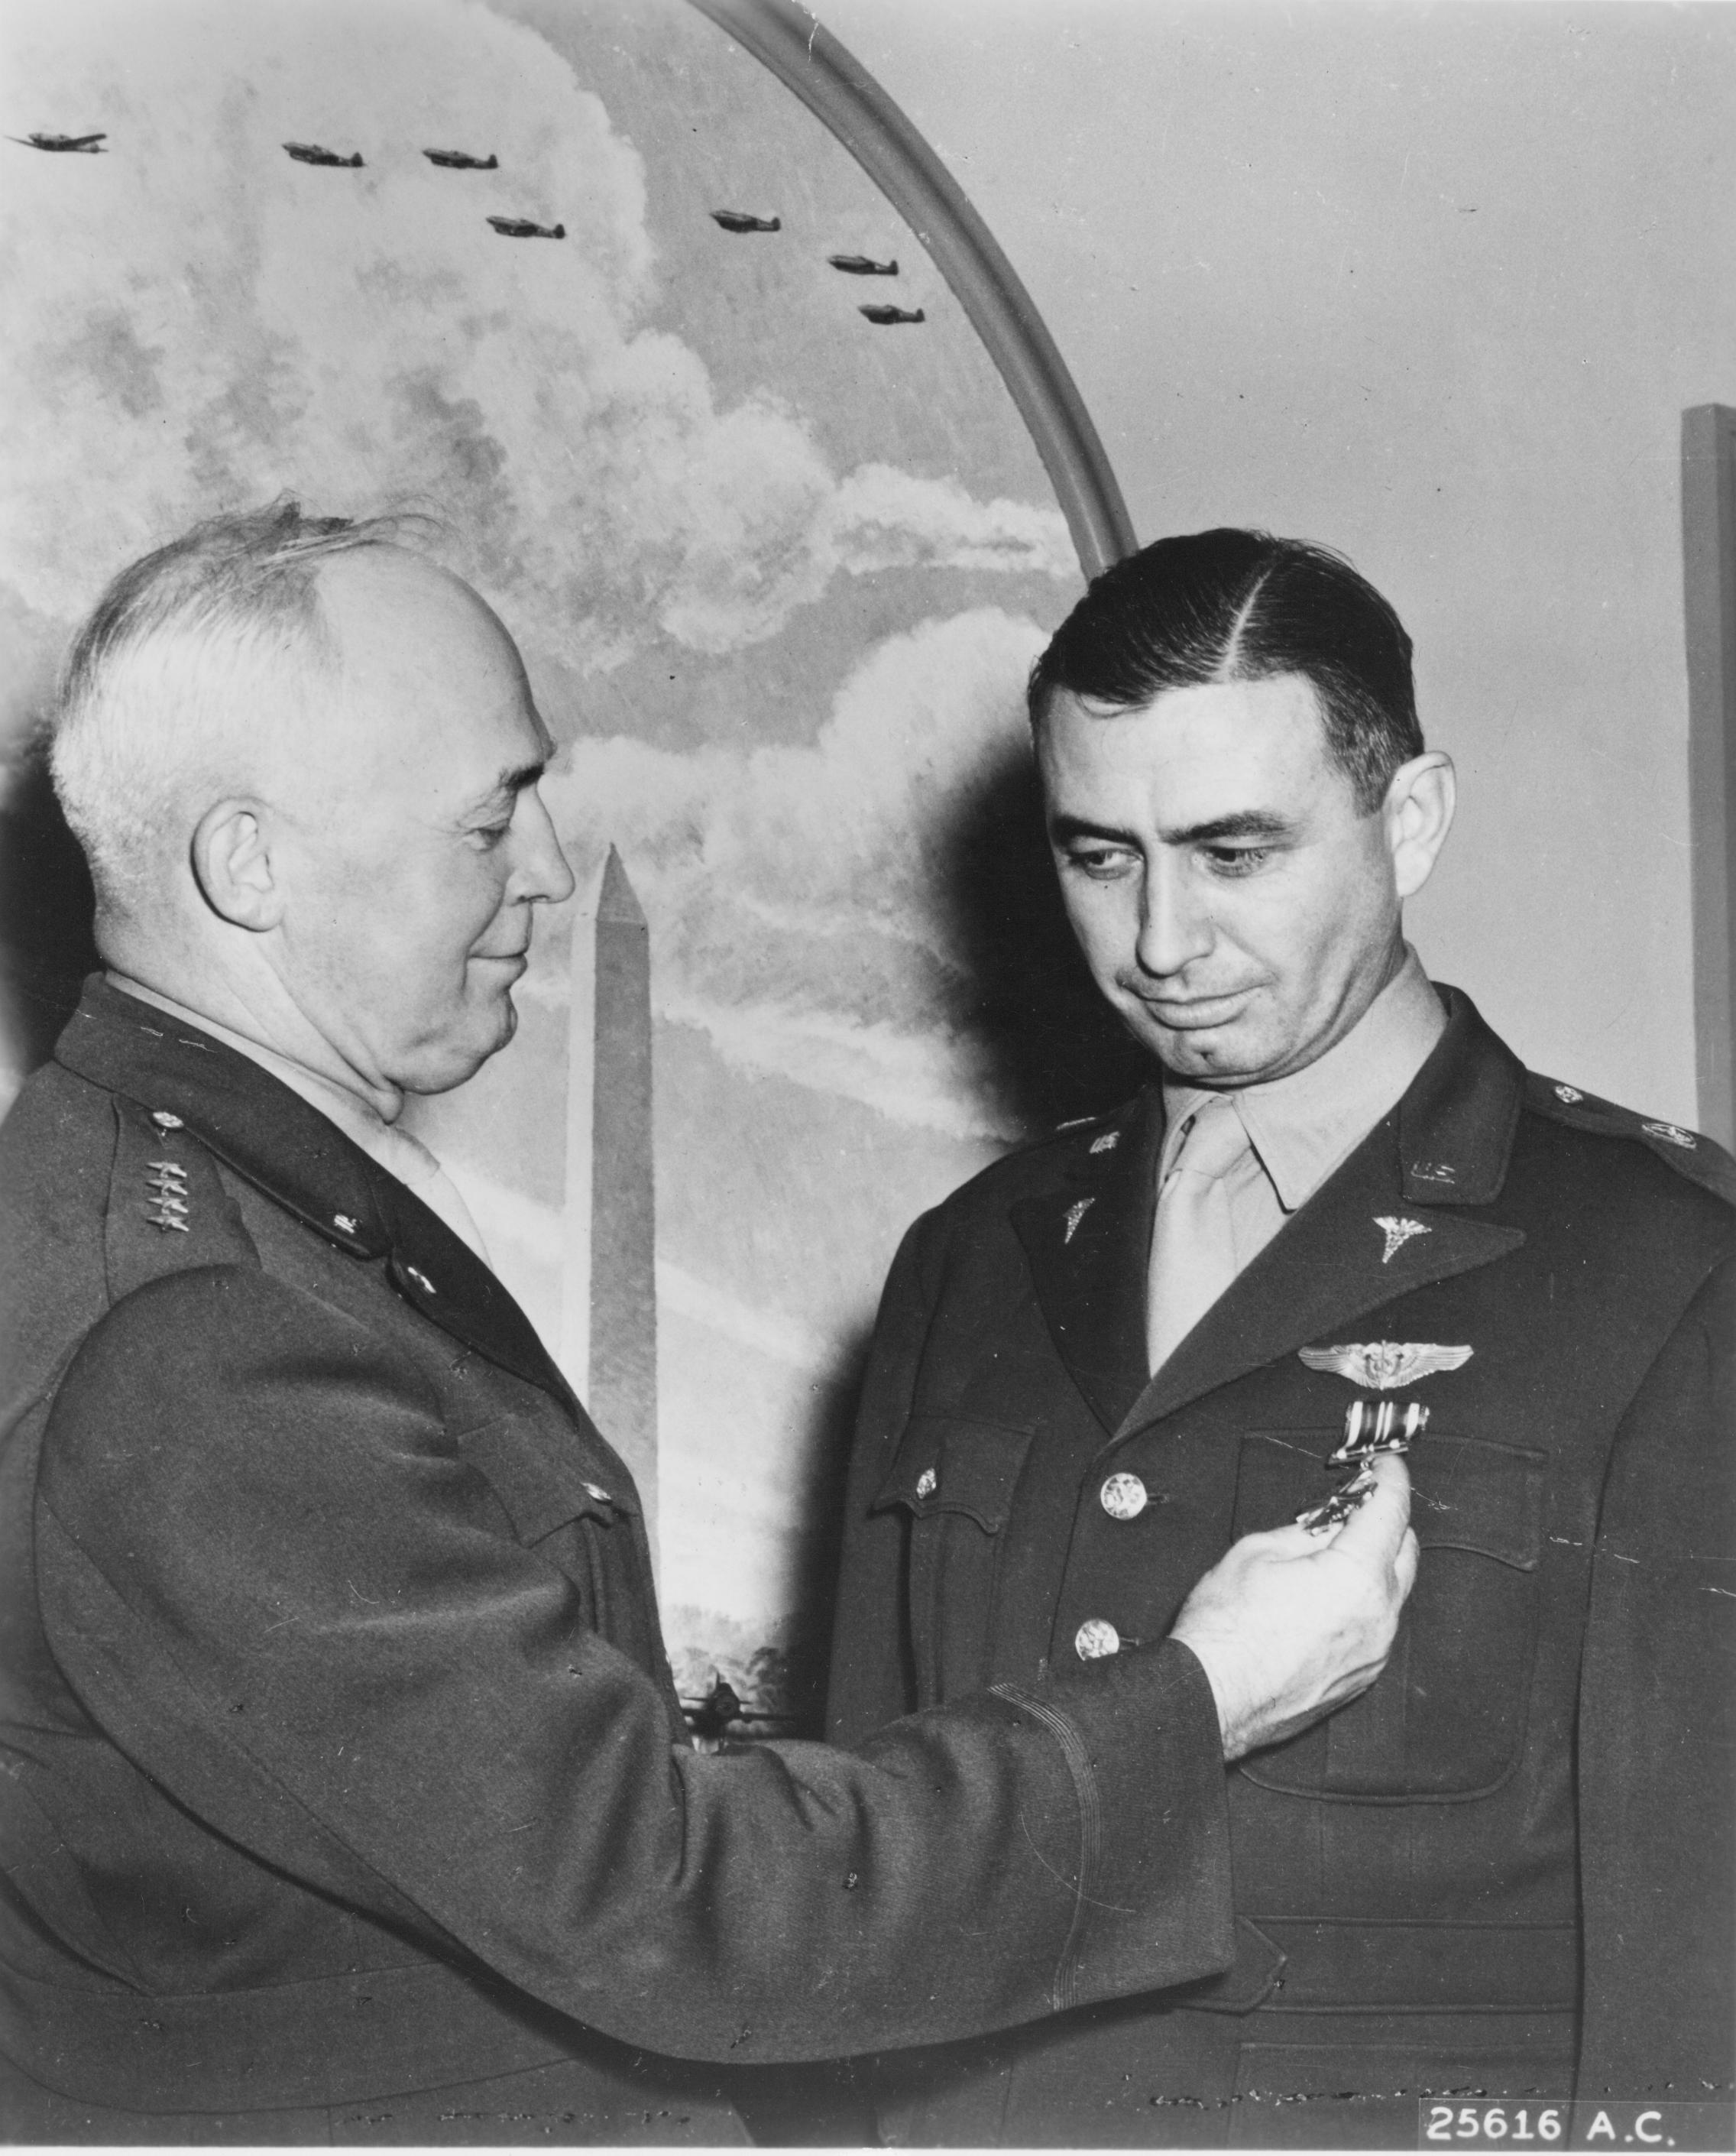 Lieutenant Colonel William.R. Lovelace II, M.D., U.S. Army Medical Corps, receives the Distinguished Flying Cross from General Henry H. Arnold, Commanding General, U.S. Army Air Forces. (U.S. Air Force)